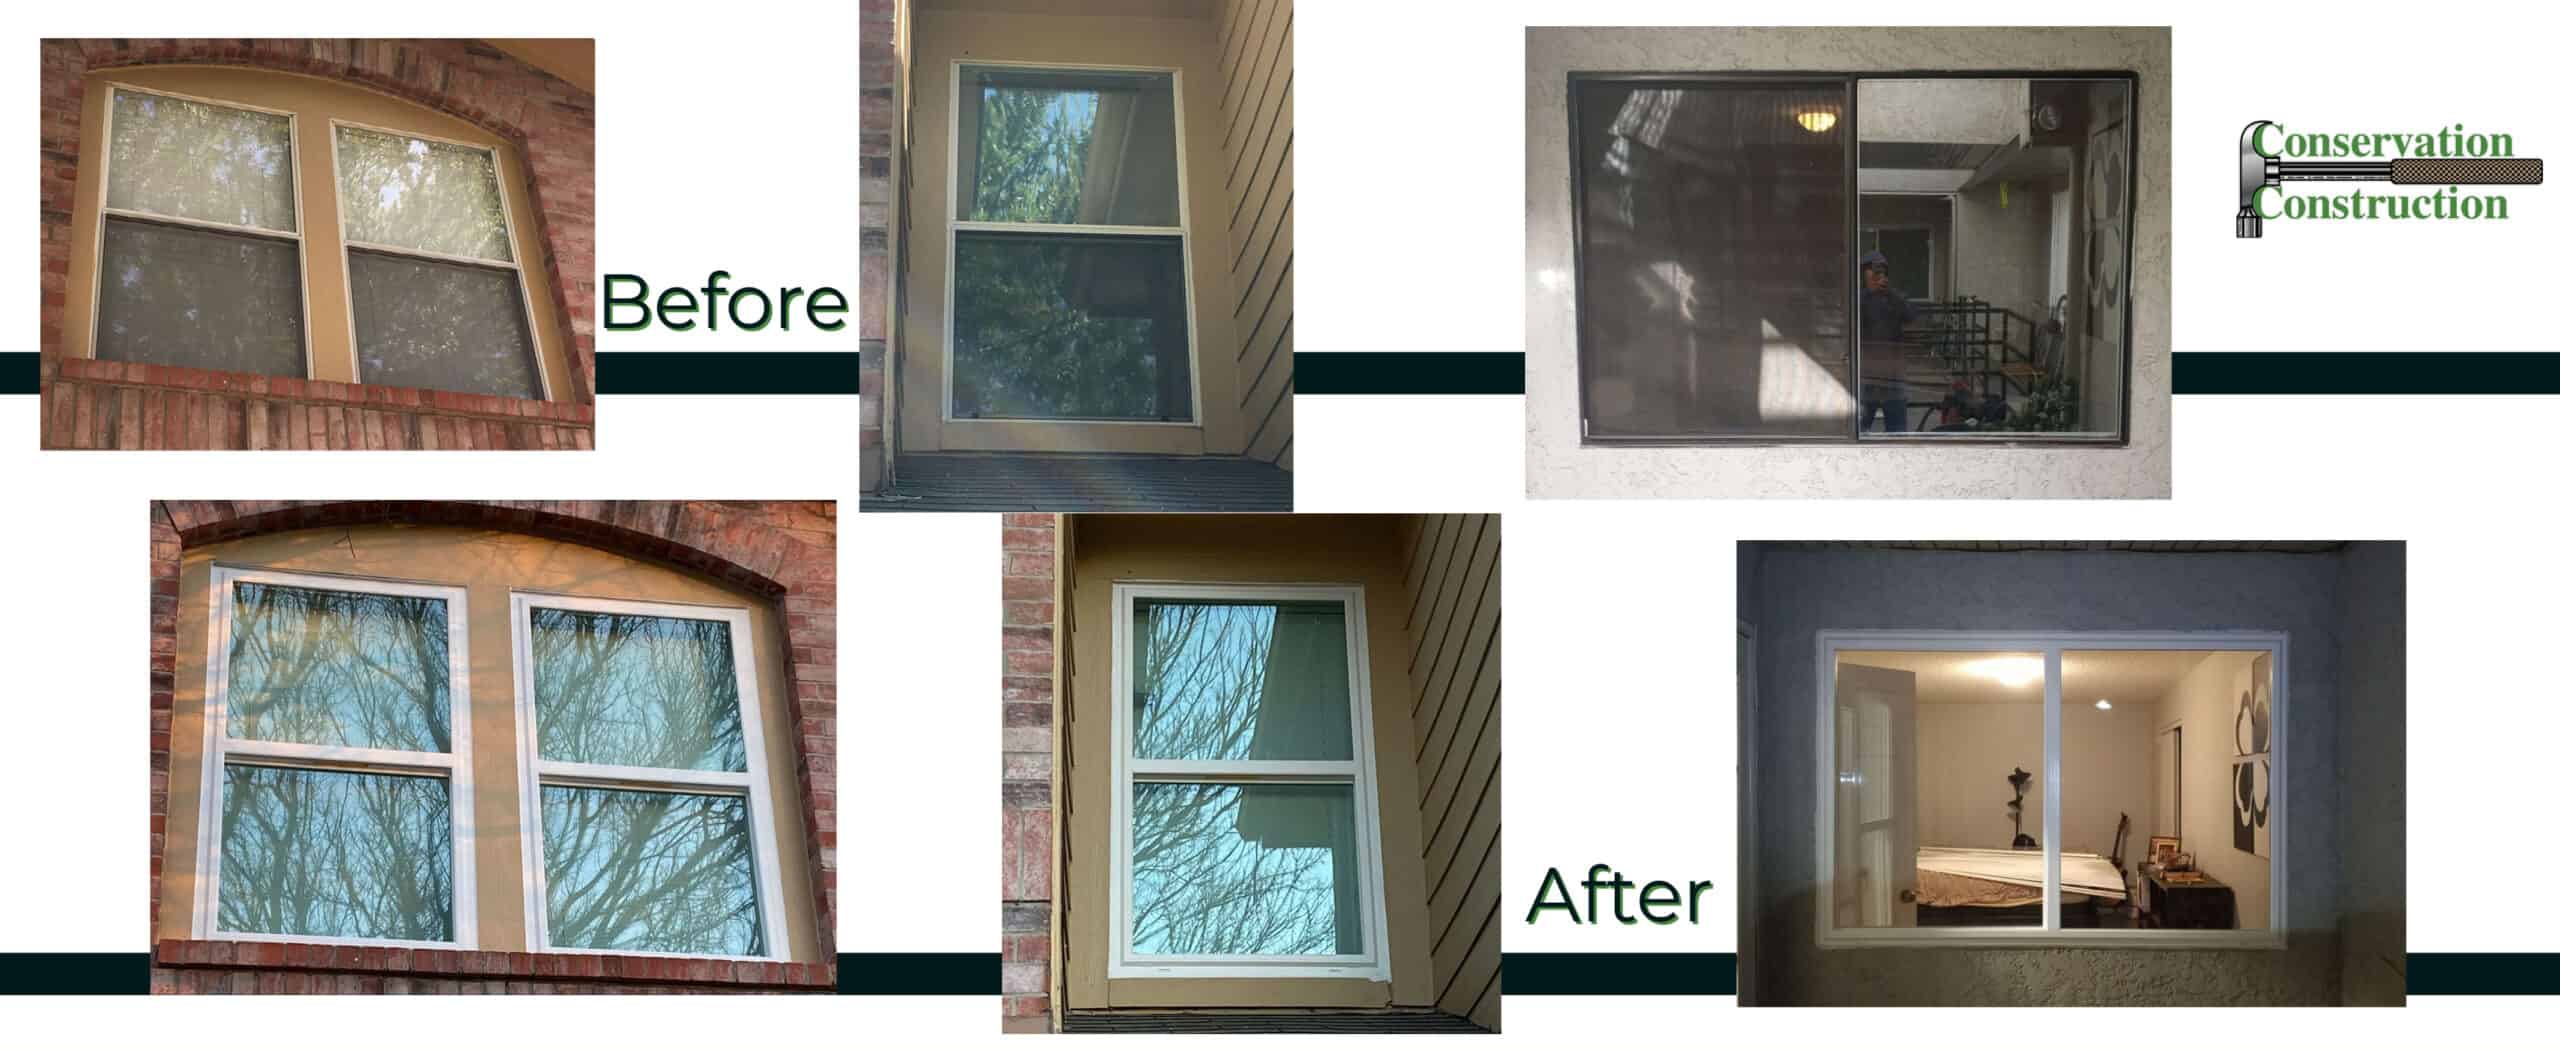 Before and After, Conservation Construction, Window Picture's,